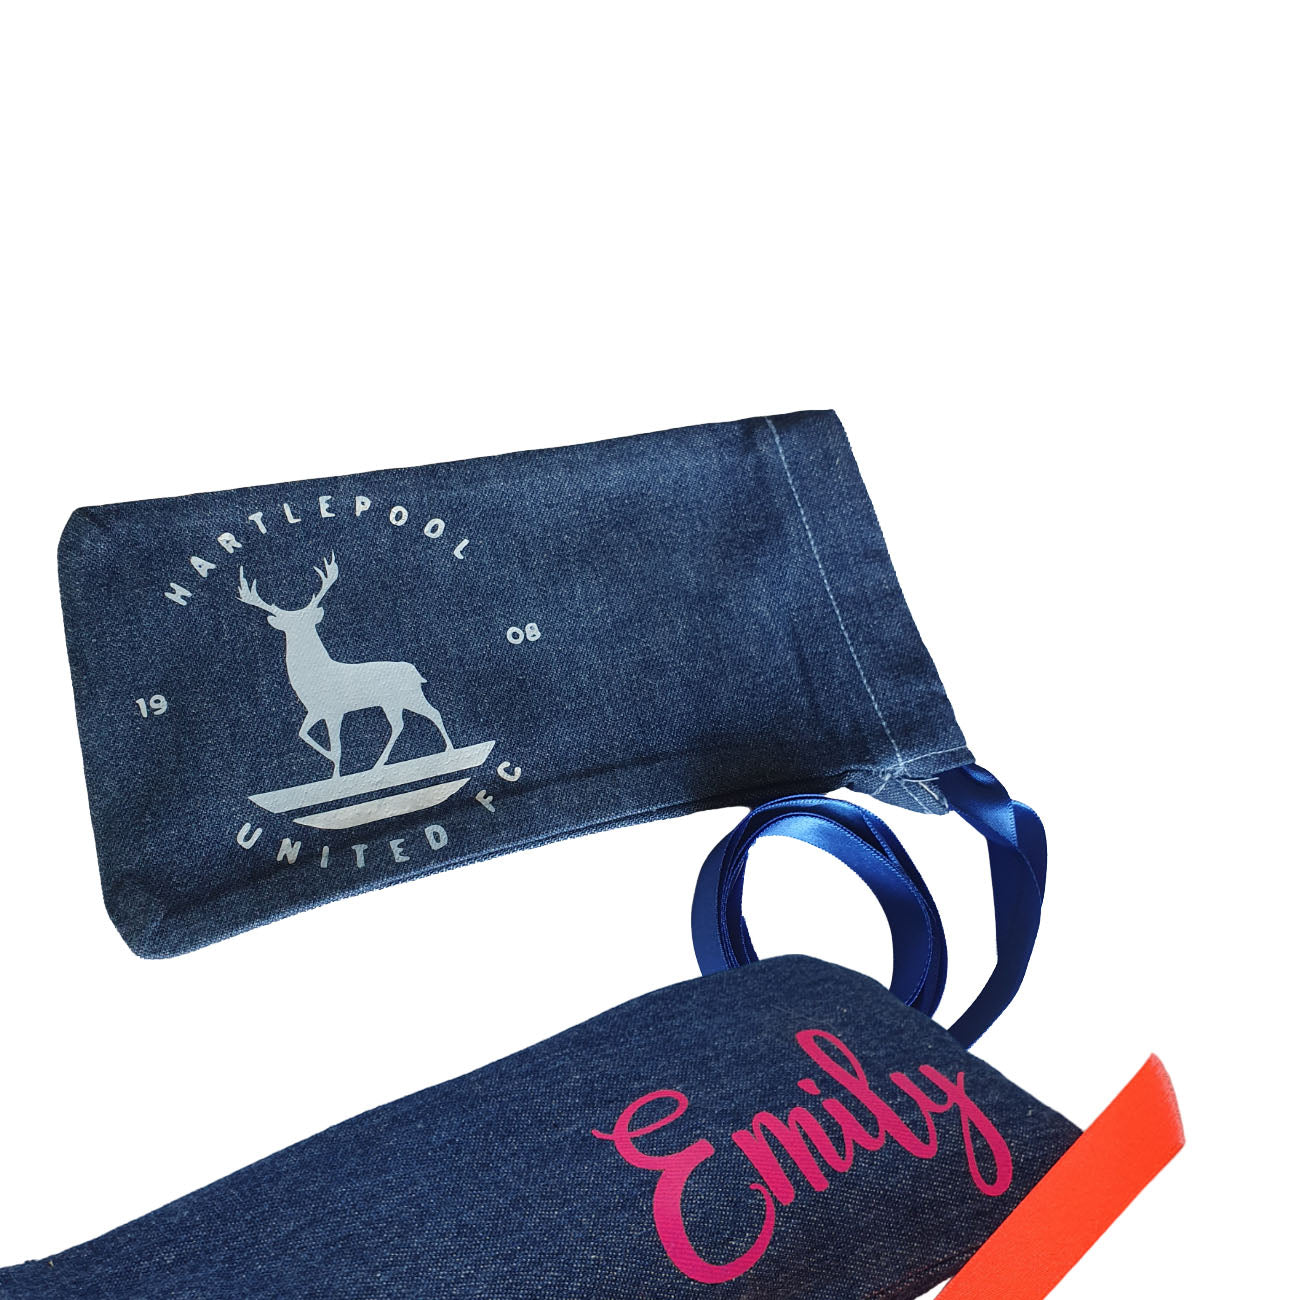 hartlepool fc fan art on blue ribbon sunglasses pouch, showing the name "Emily" on a pink ribbon sunglasses pouch